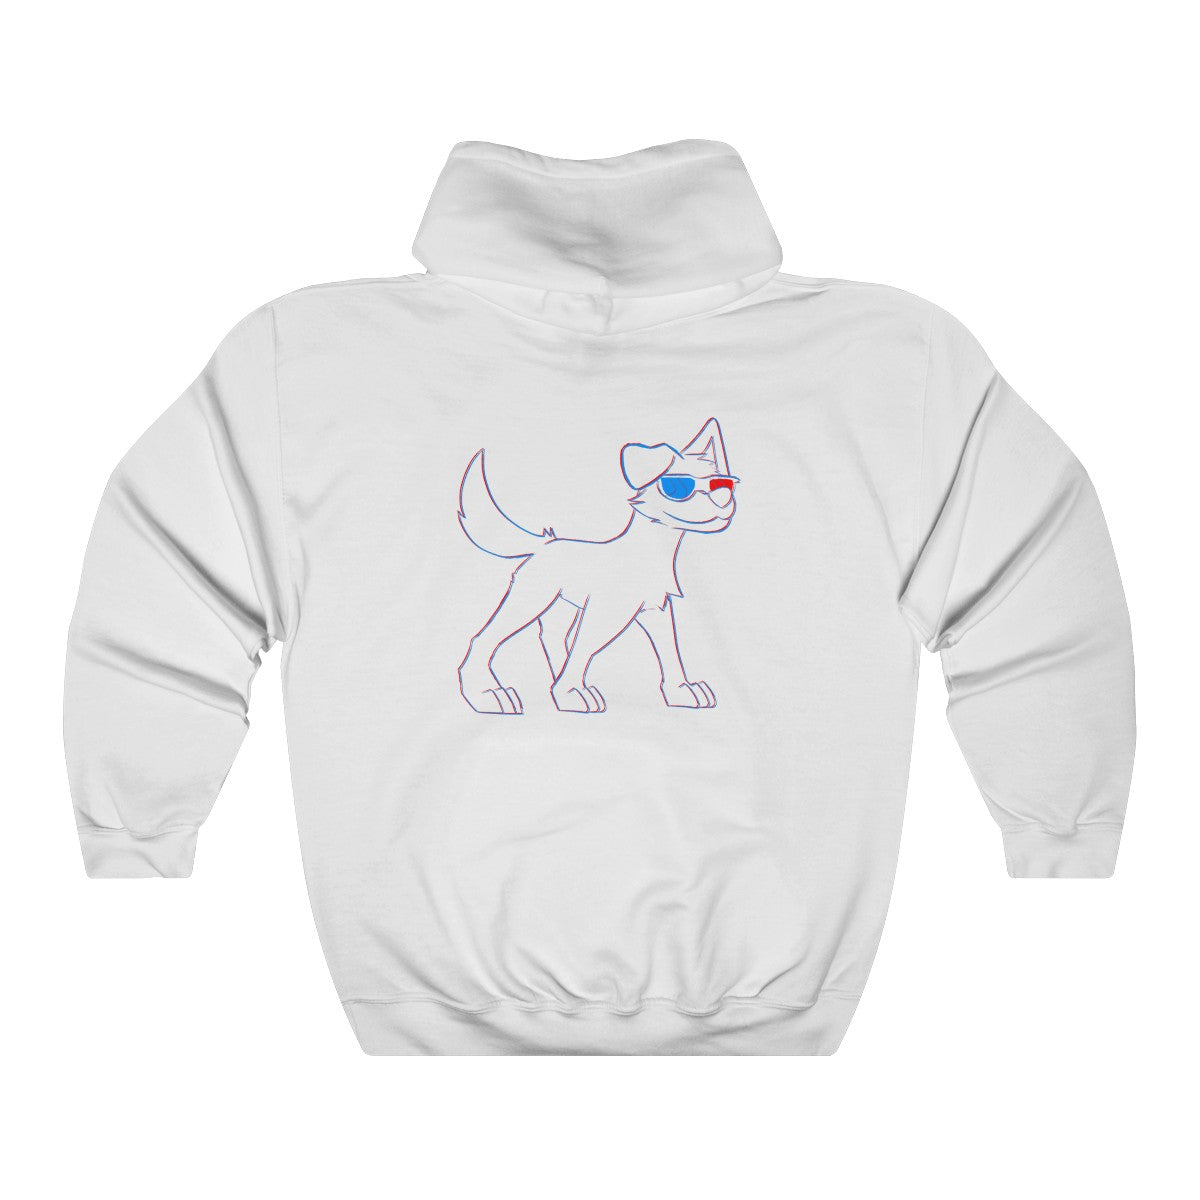 Doggie 3D - Hoodie Hoodie Project Spitfyre White S 